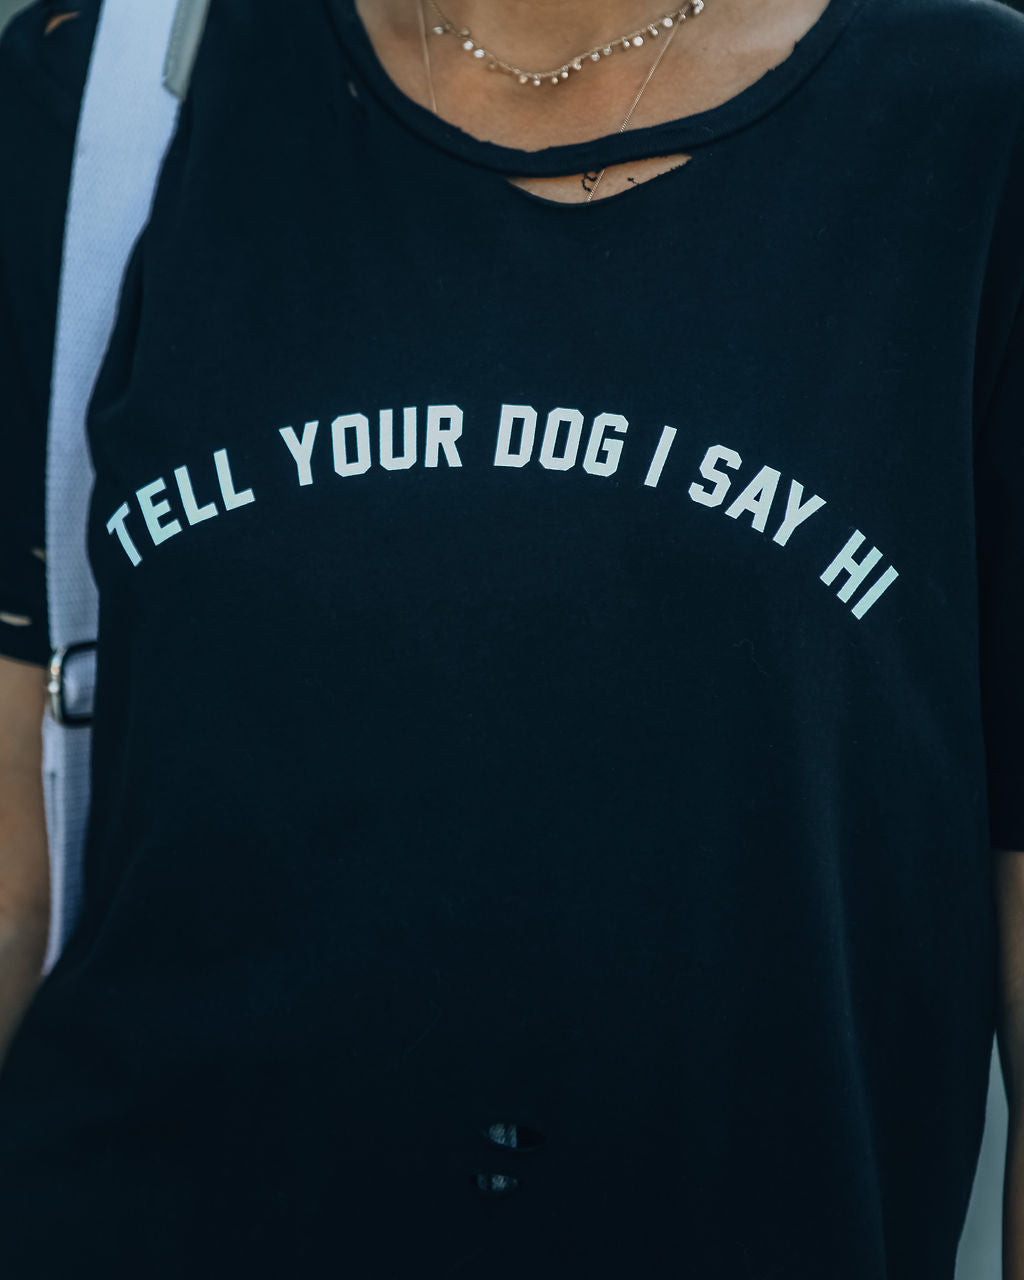 Tell Your Dog I Say Hi Distressed Cotton Tee